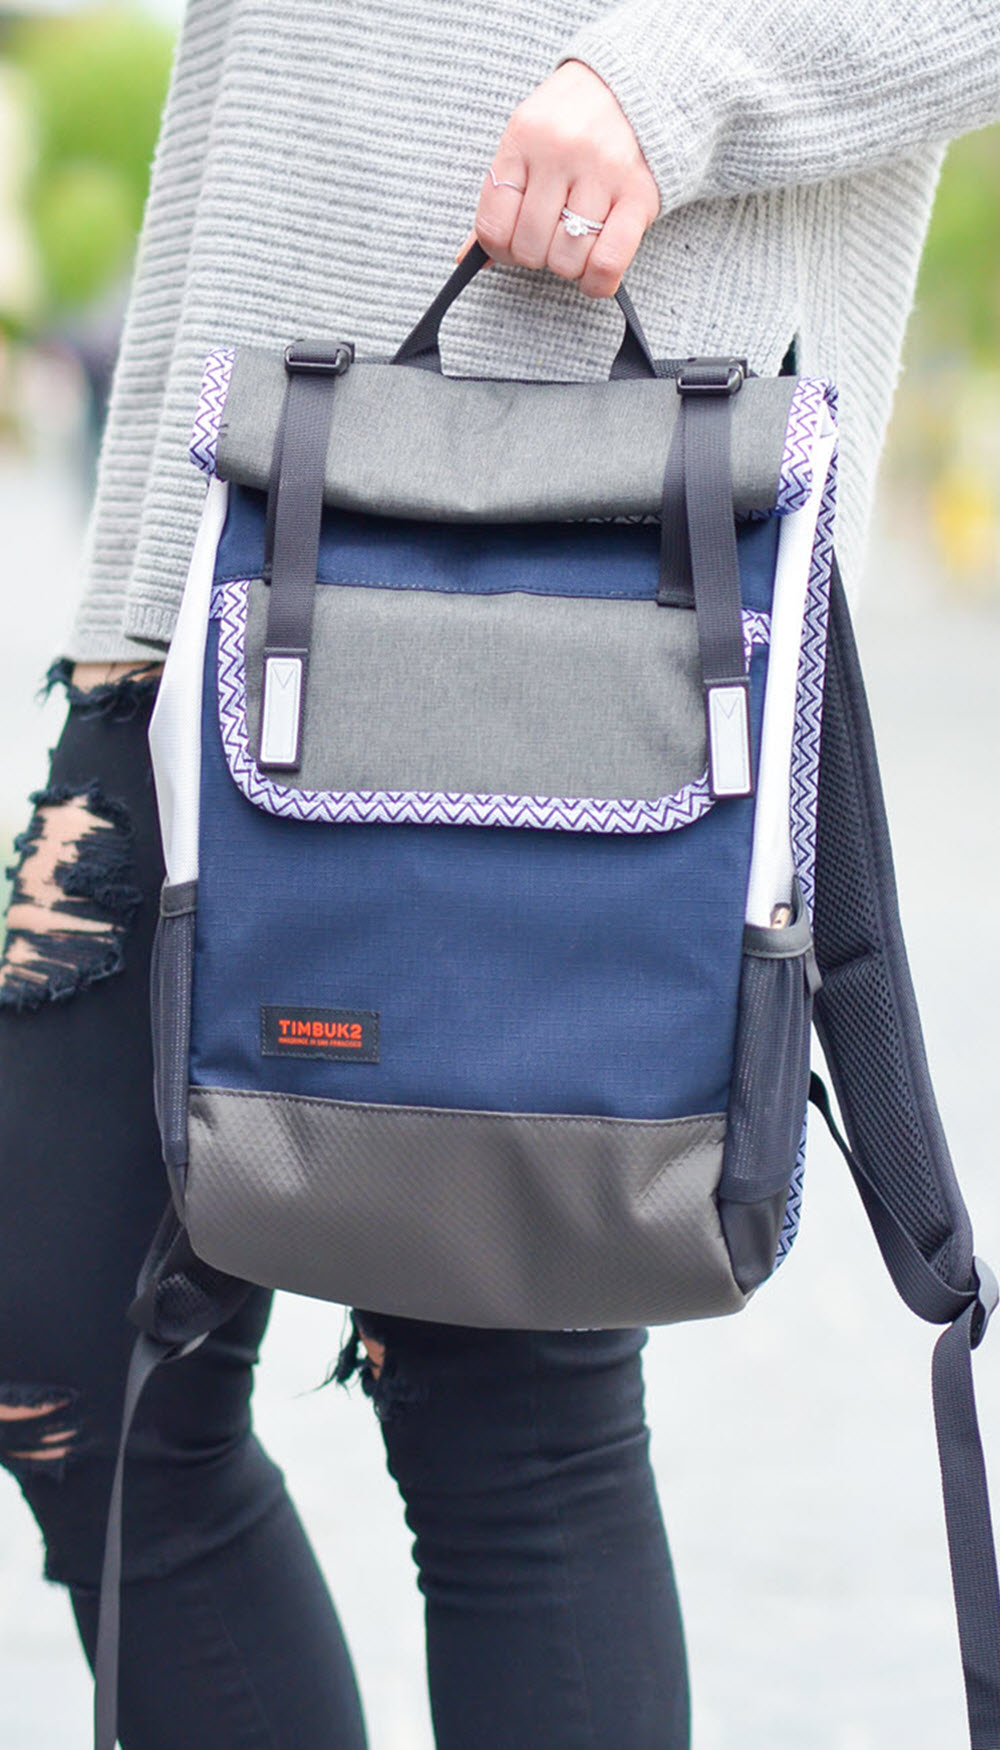 Mini Timbuk2 Prospect Backpack - Best Small Backpack for Day Hikes Review